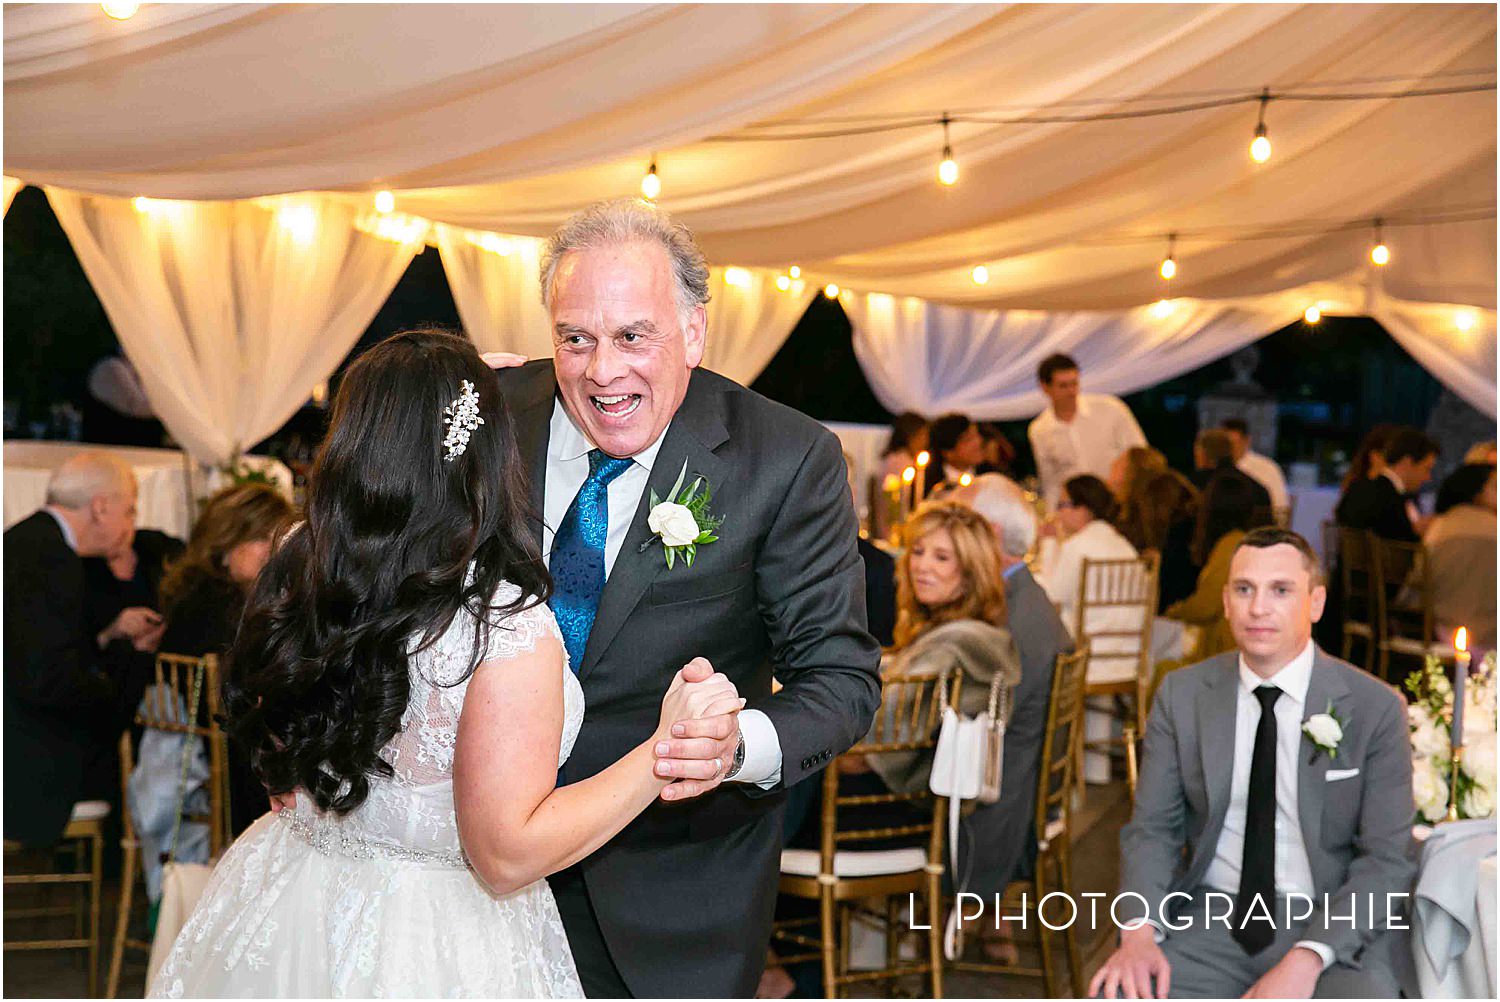 L Photographie St. Louis wedding photography Westwood Country Club Cosmopolitan Events_0045.jpg